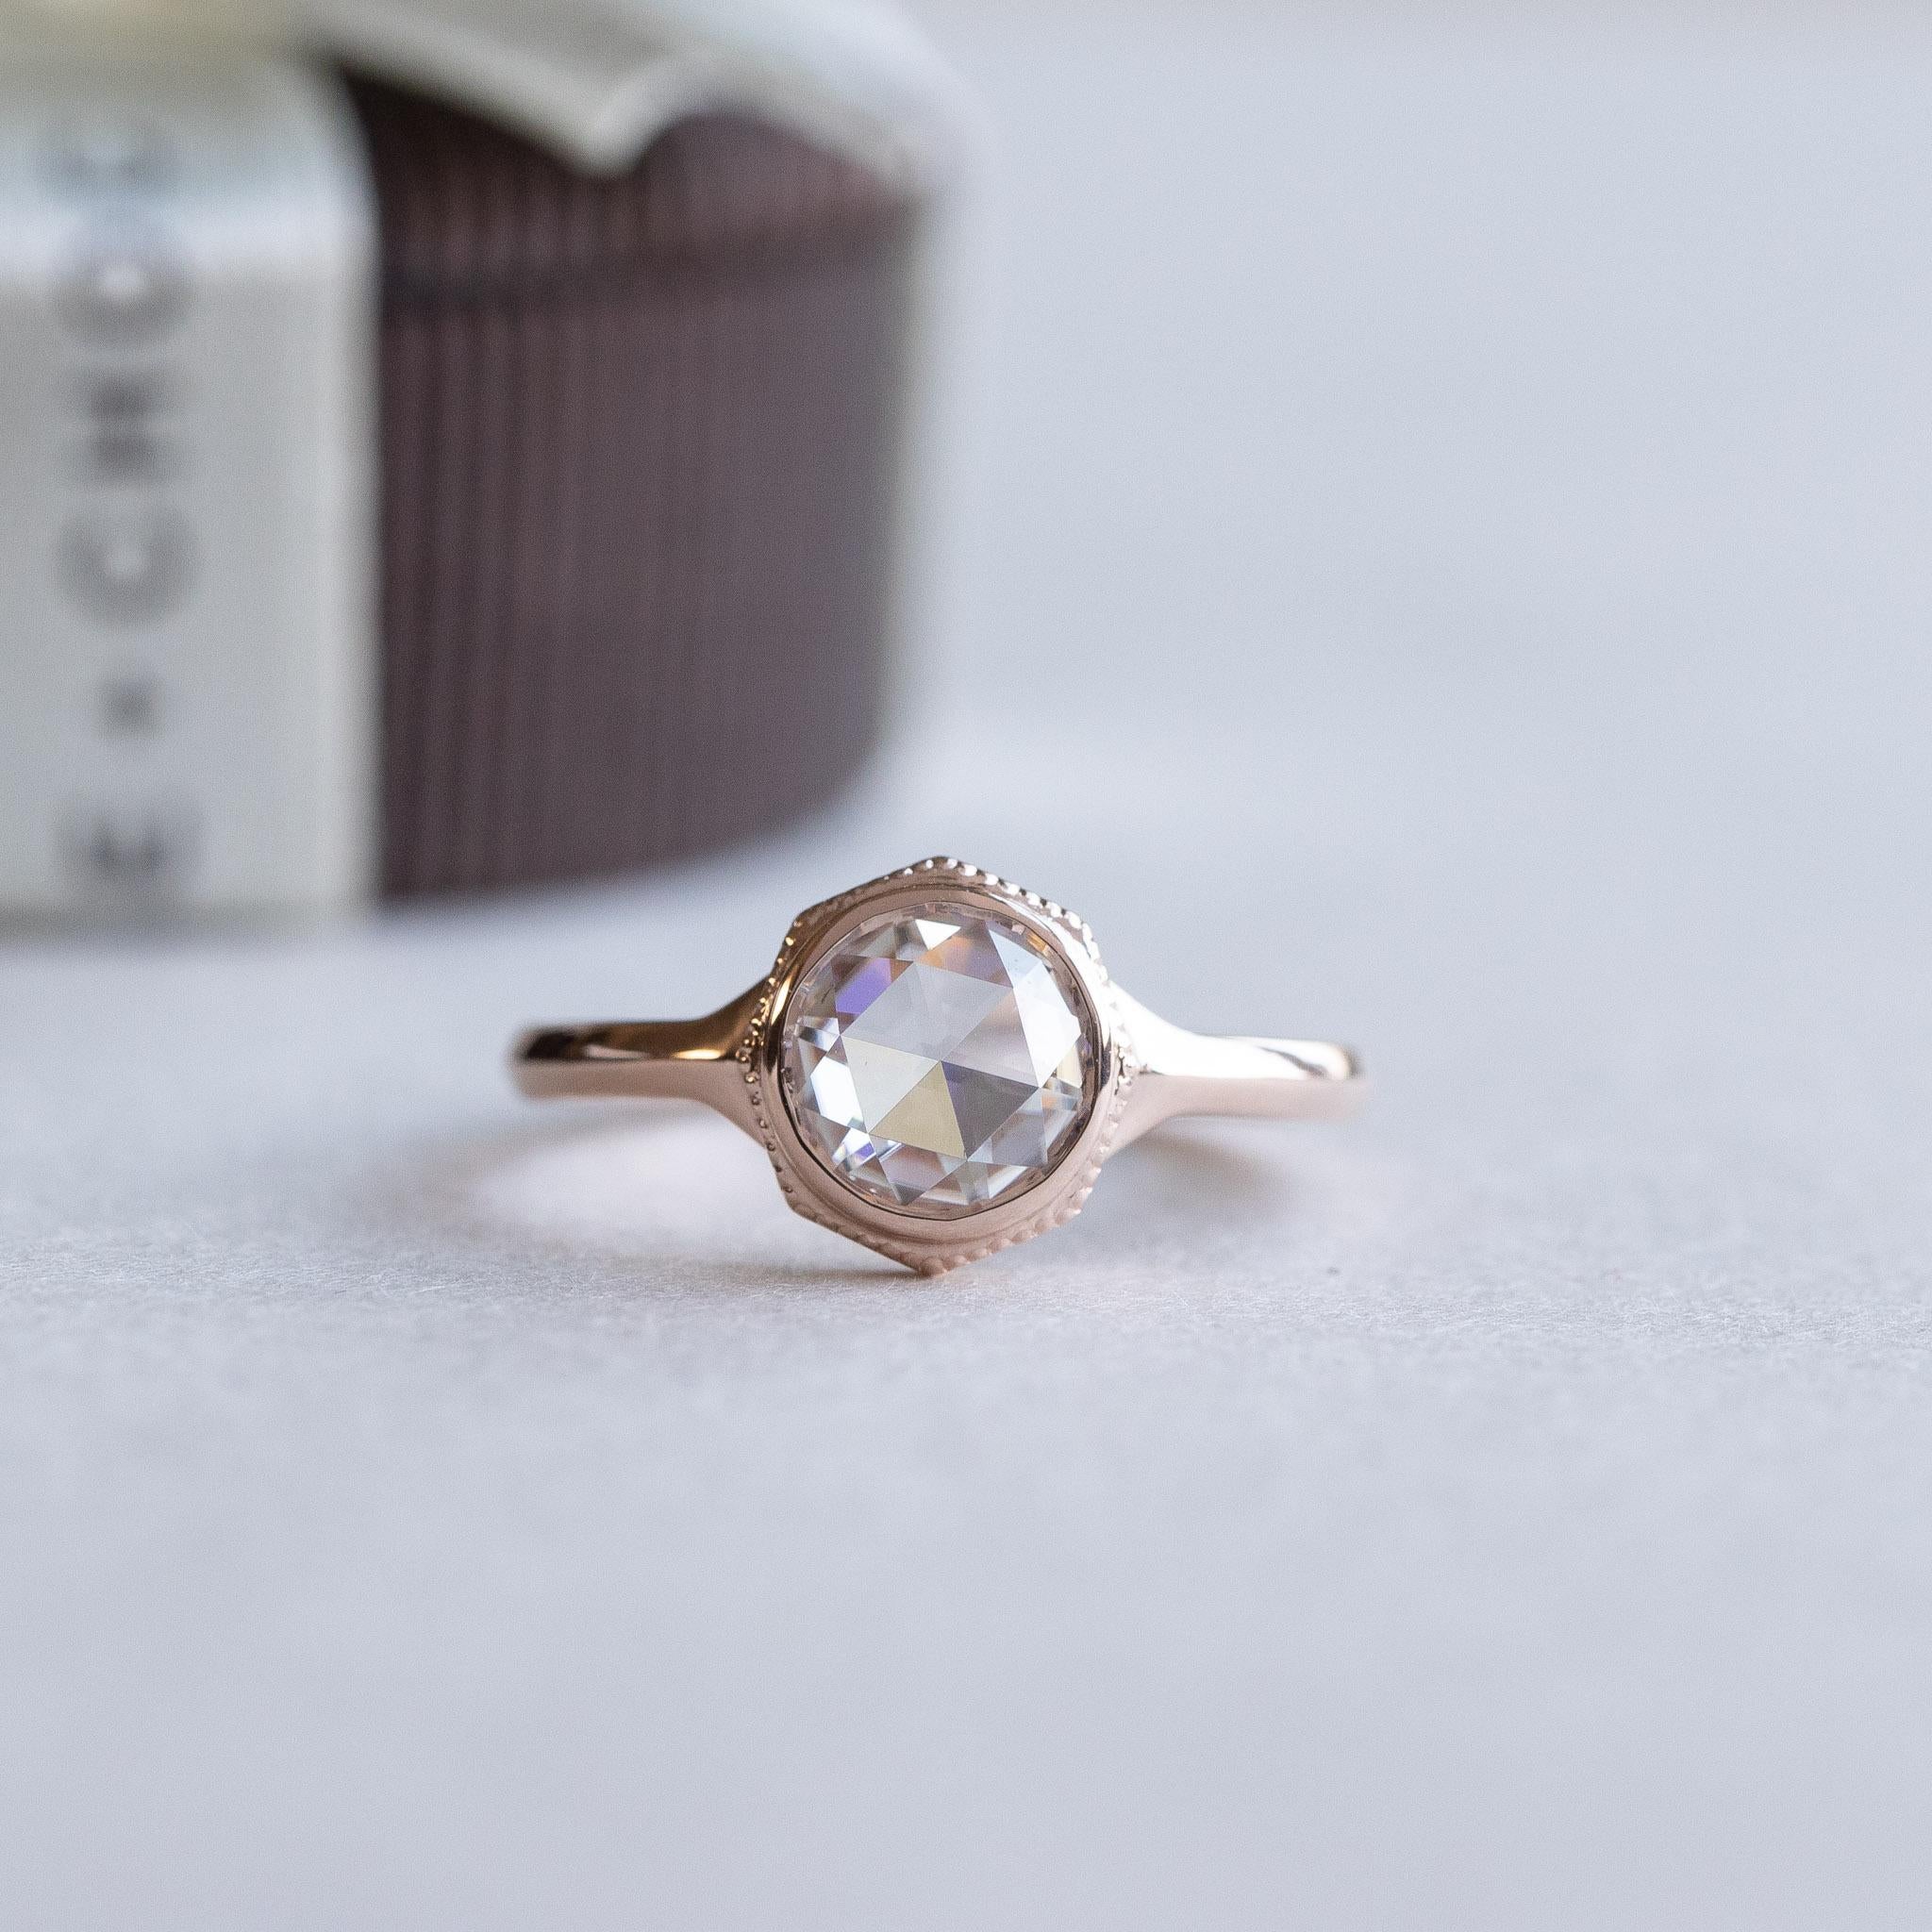 Low profile rose cut diamond set on 14k rose gold
Approx .75 carat Diamond
Stone: 6.5mm
Clarity: VS/SI1
Color: GHI
Cut: Rose cut
1.4mm band width.
Rose gold, white gold, yellow gold available

